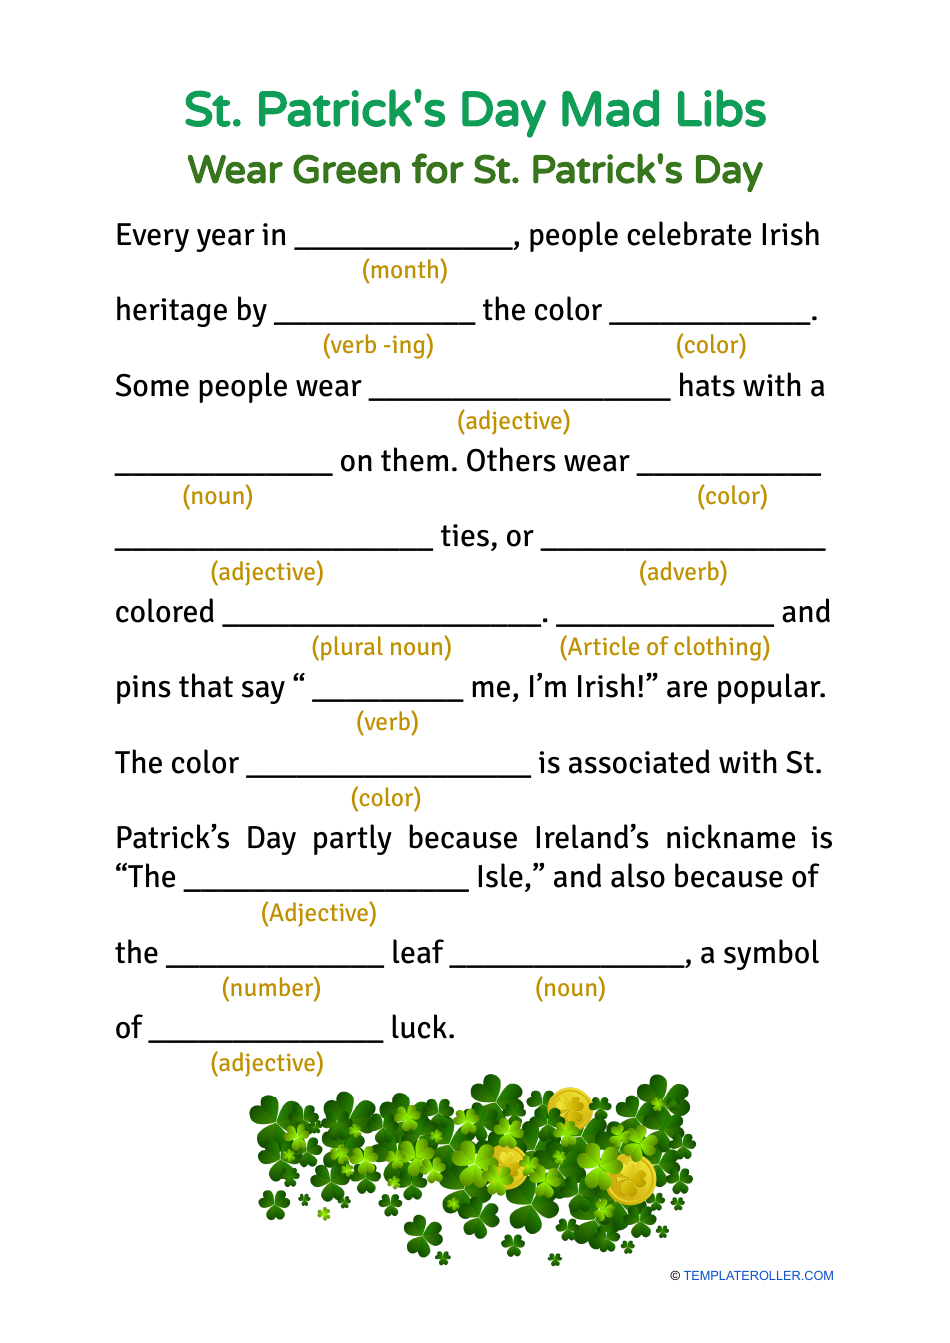 st-patrick-s-day-mad-libs-wear-green-download-printable-pdf